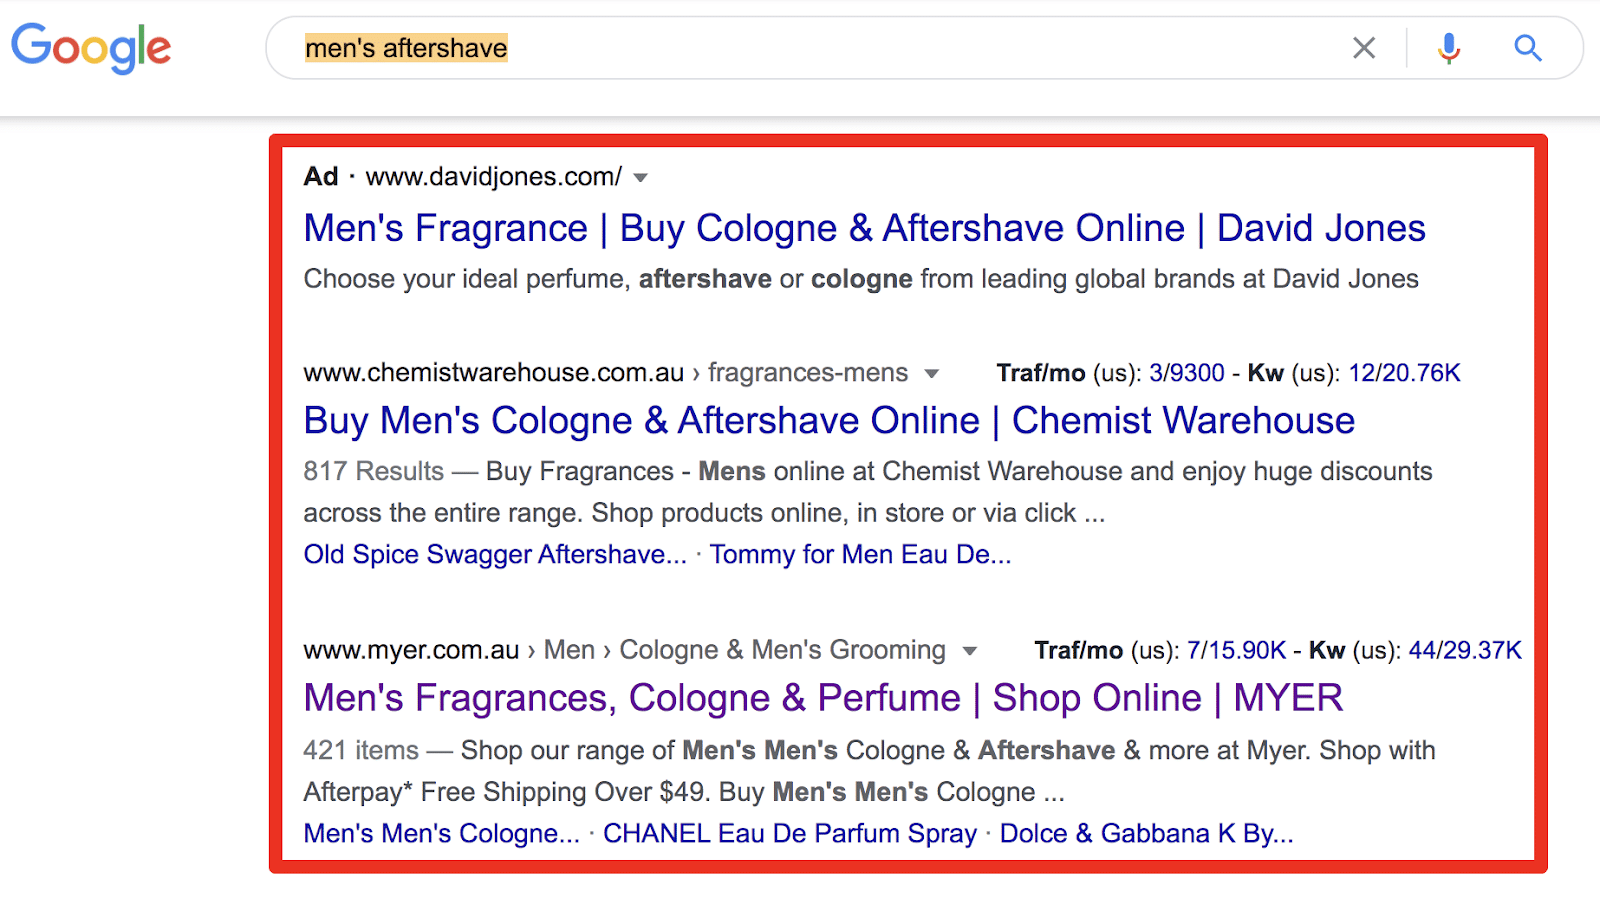 serp results show ecommerce pages when google searching men's aftershave